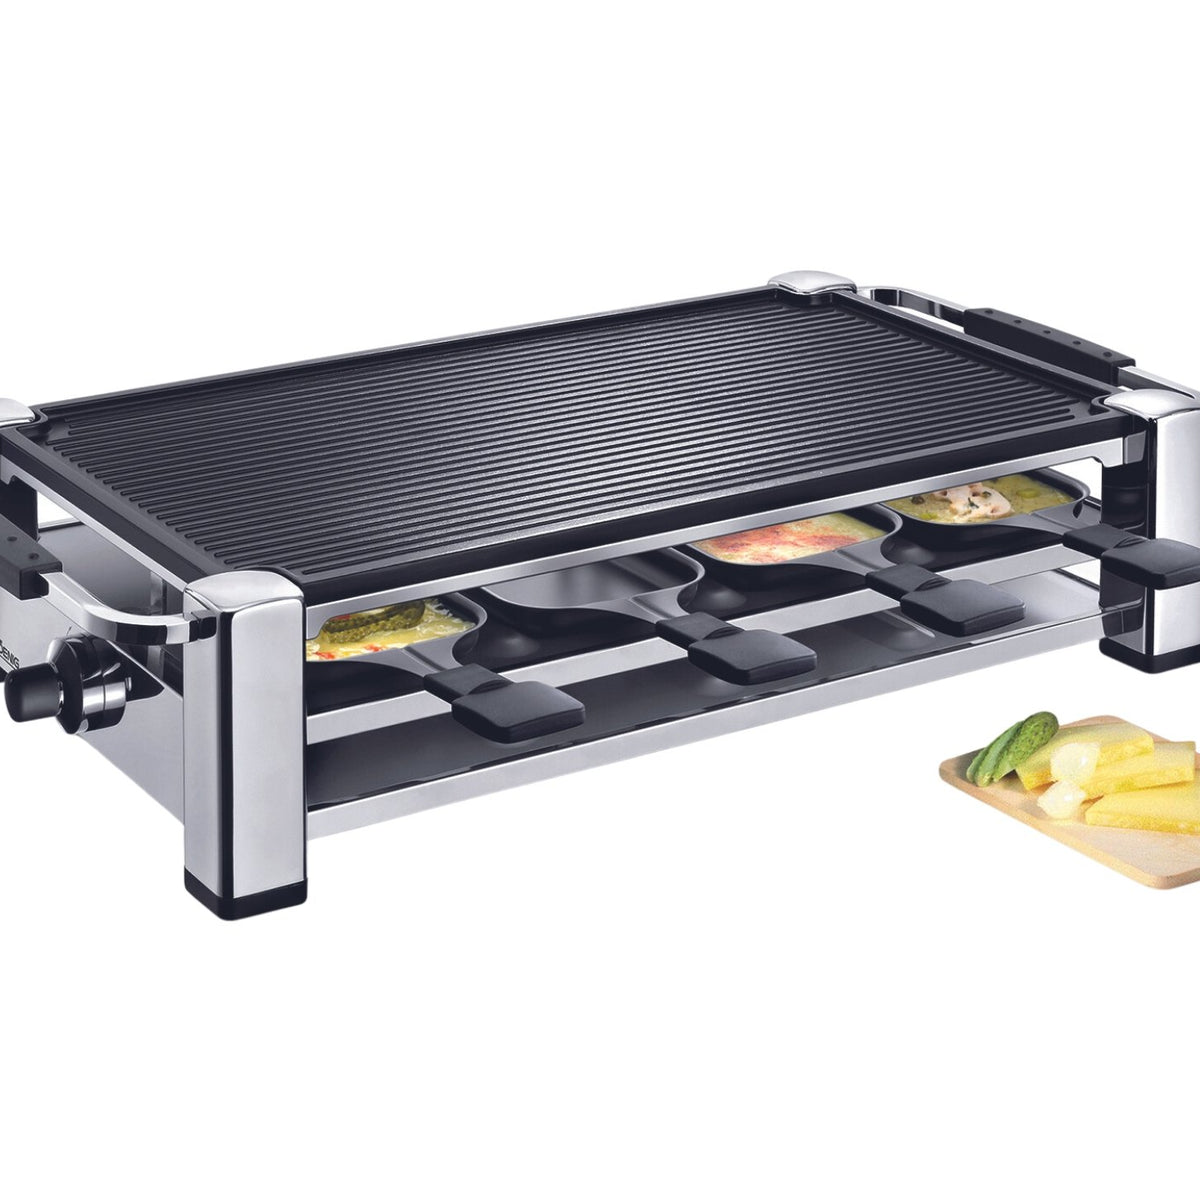 KOENIG raclette grill, 8 pieces, 8 non-stick coated pans